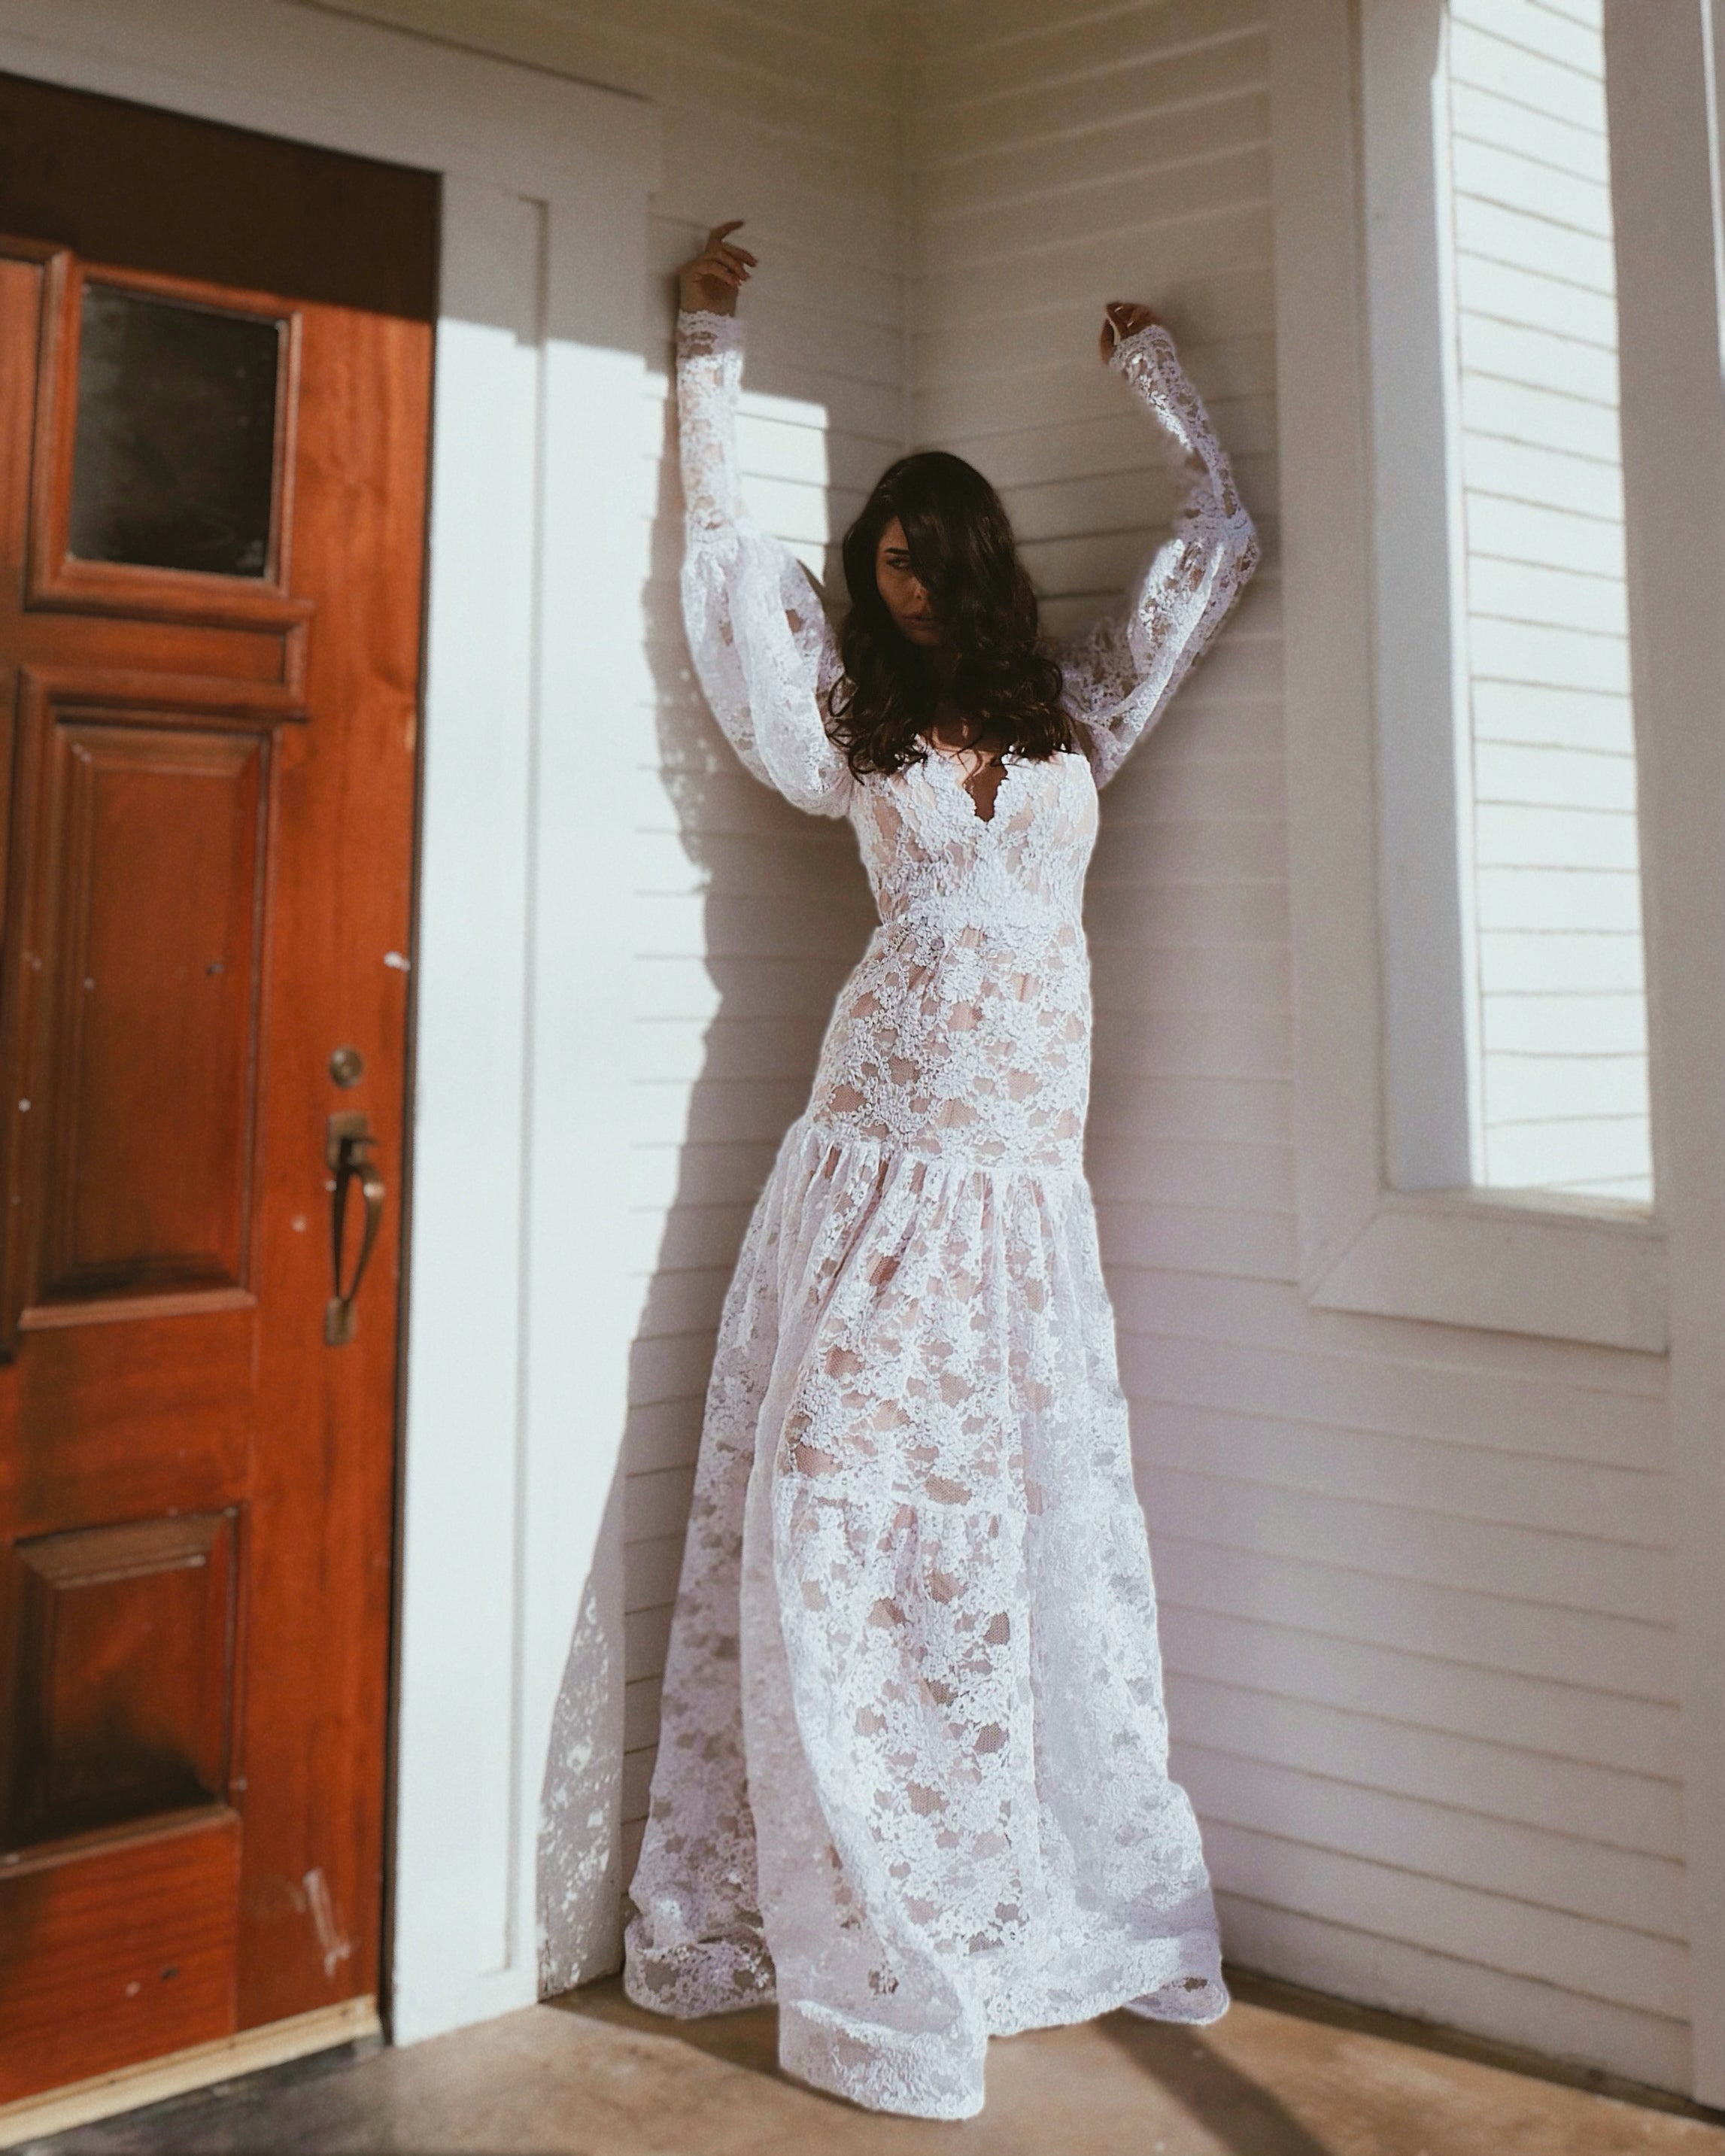 Front - a model poses in the "Meadow" vintage lace wedding gown by Lauren Elaine Bridal.